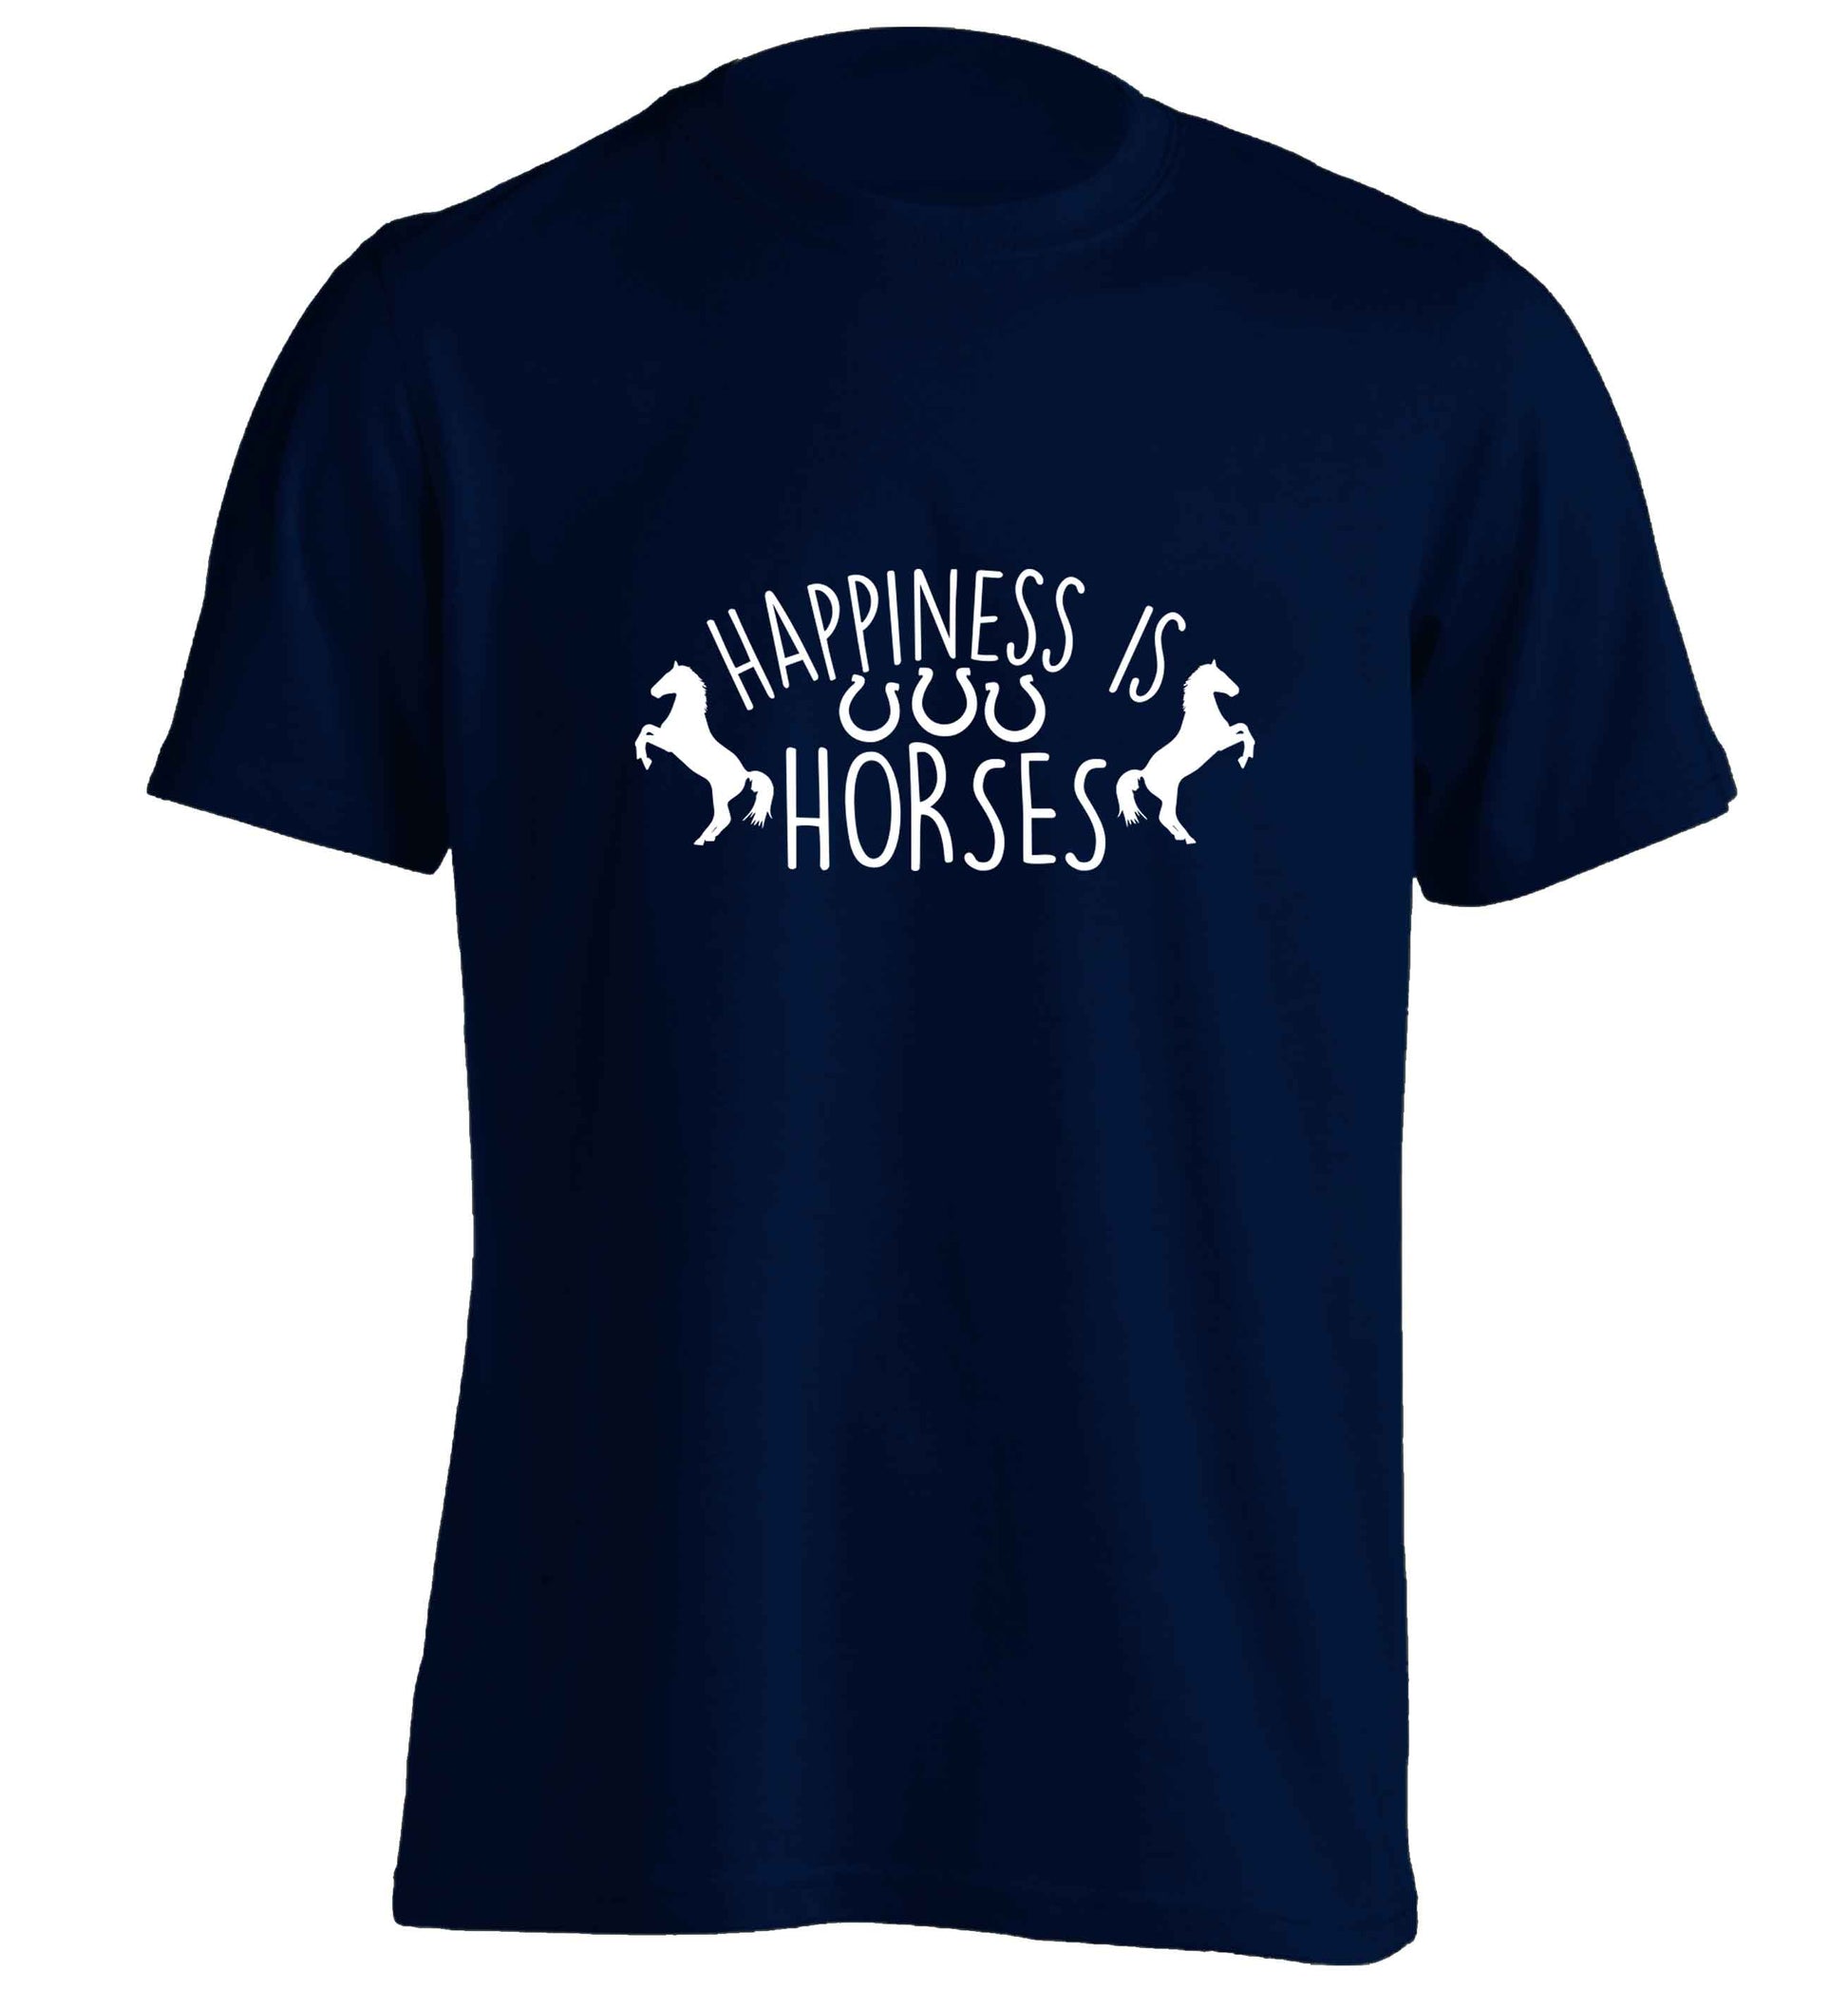 Happiness is horses adults unisex navy Tshirt 2XL